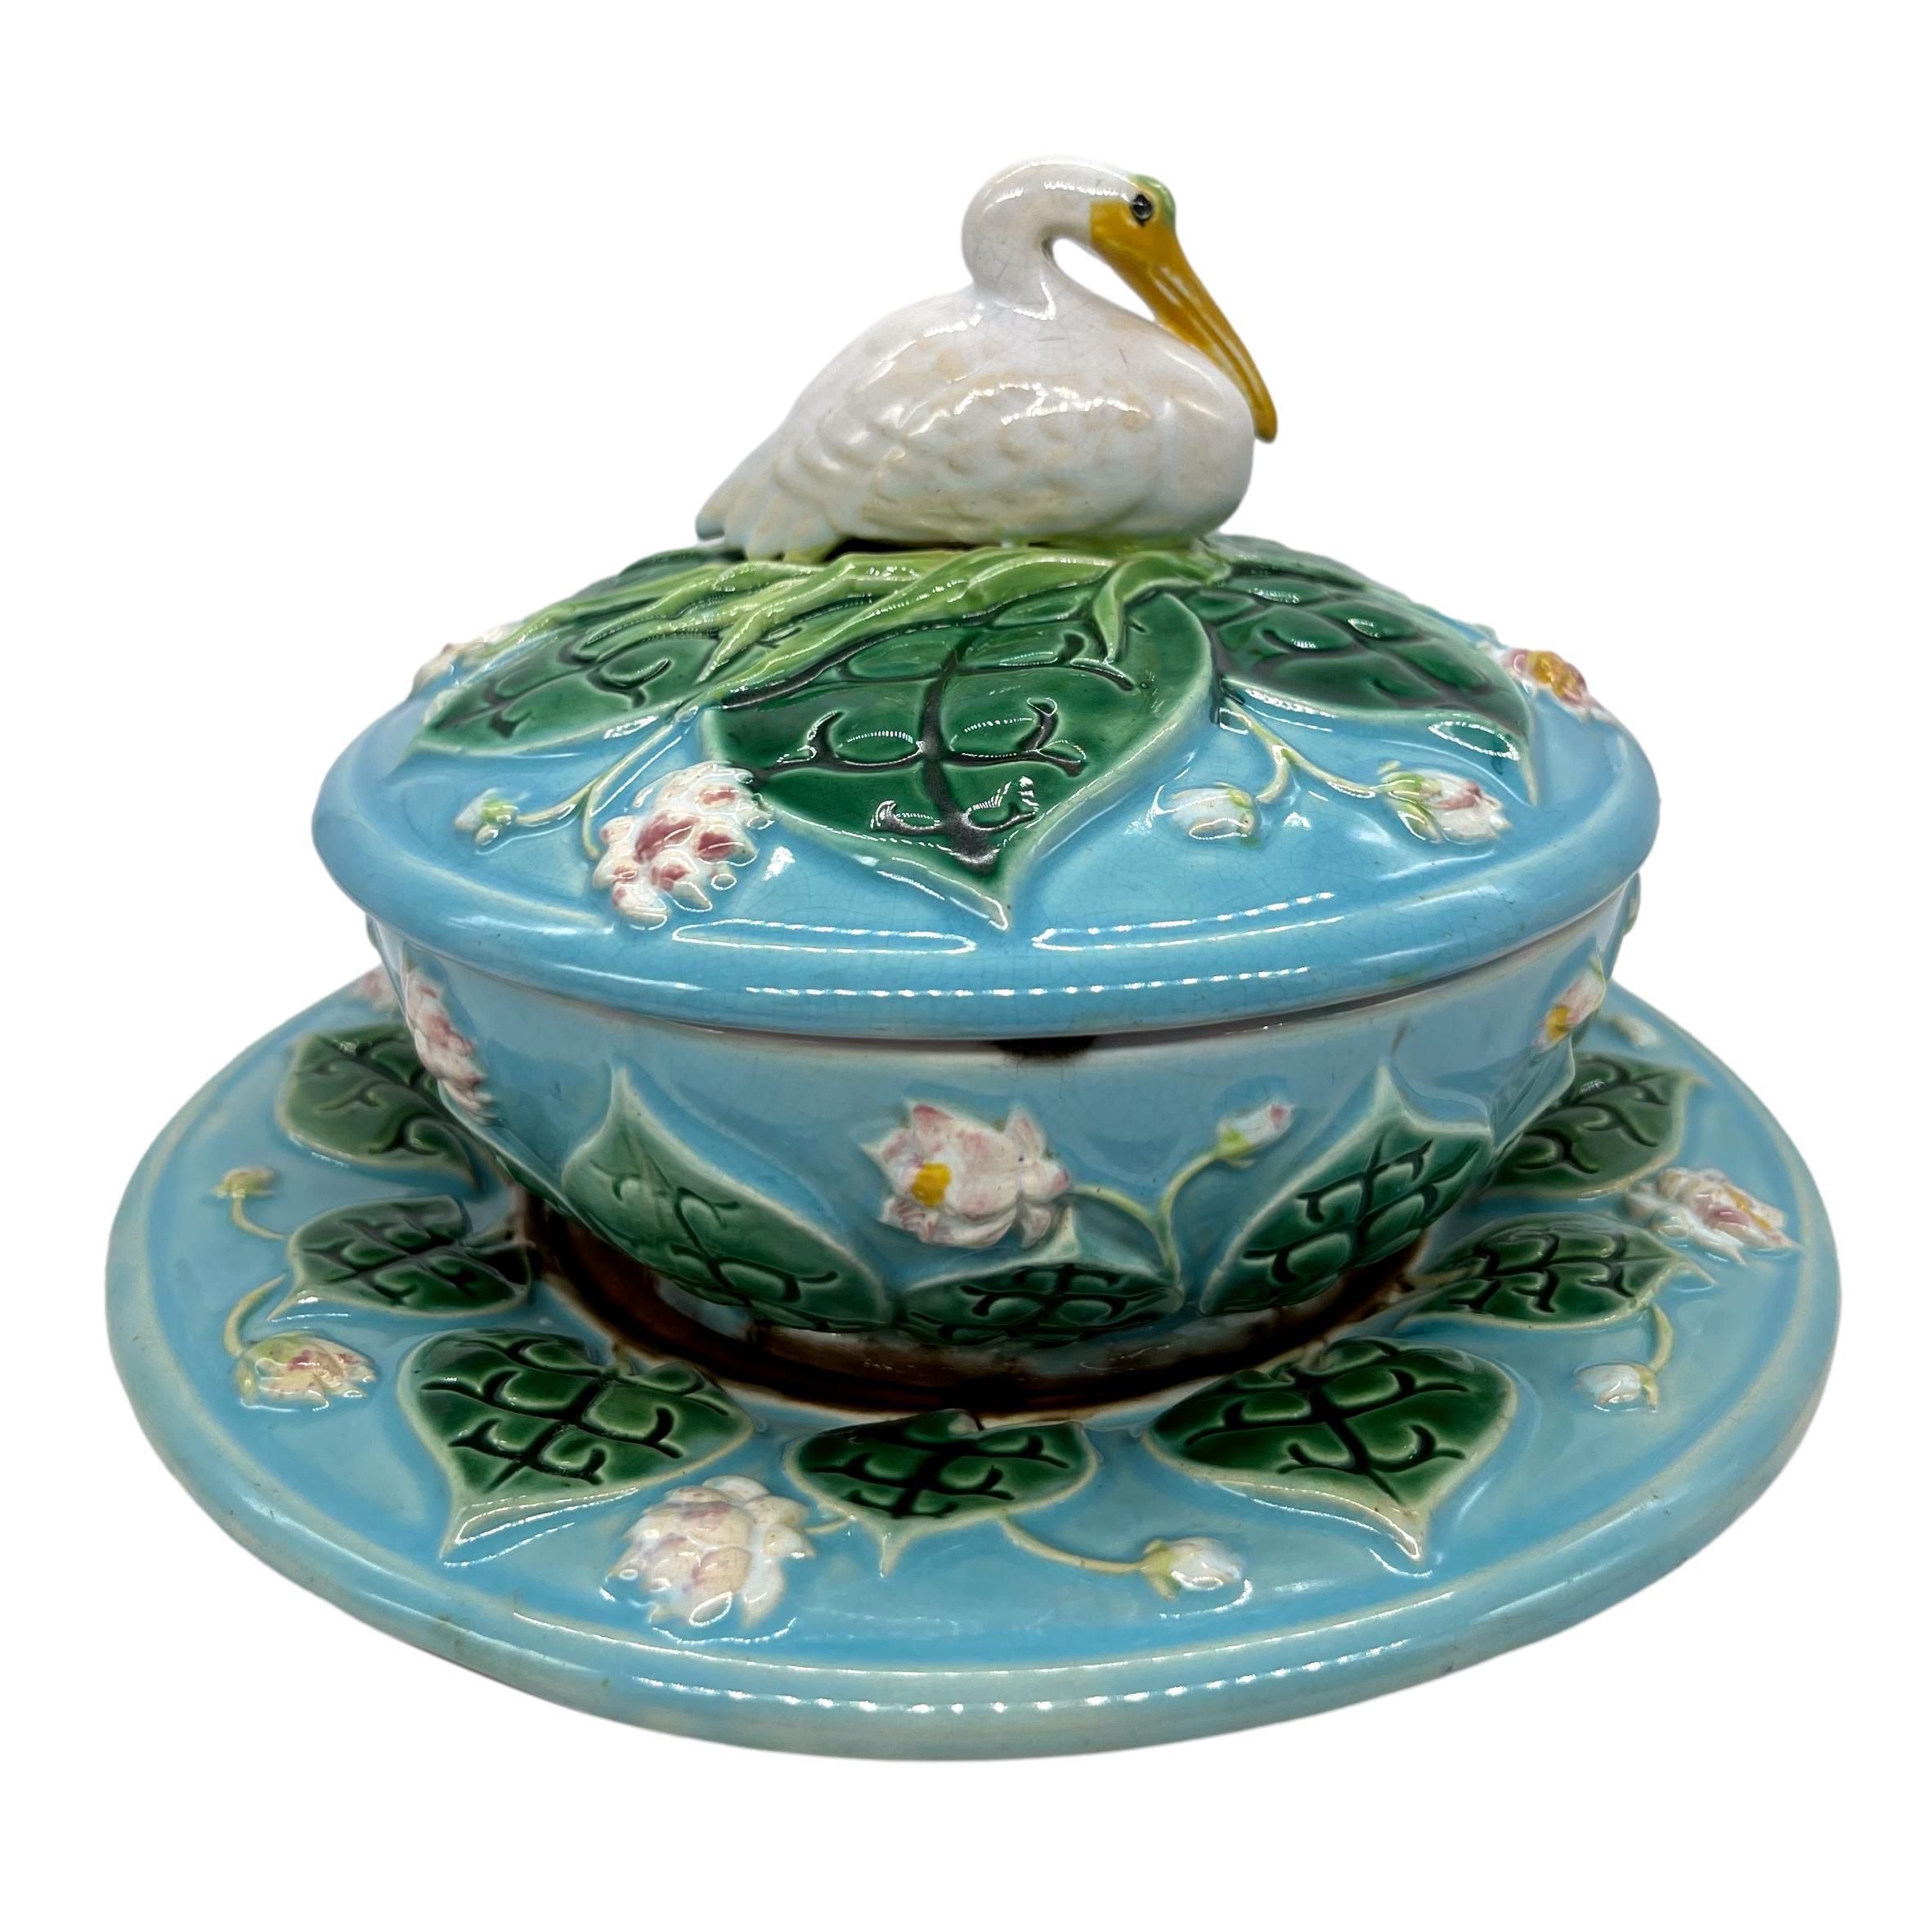 Molded George Jones Majolica Pâté Server with Stand & Cover, 'Stork' Finial, Dated 1875